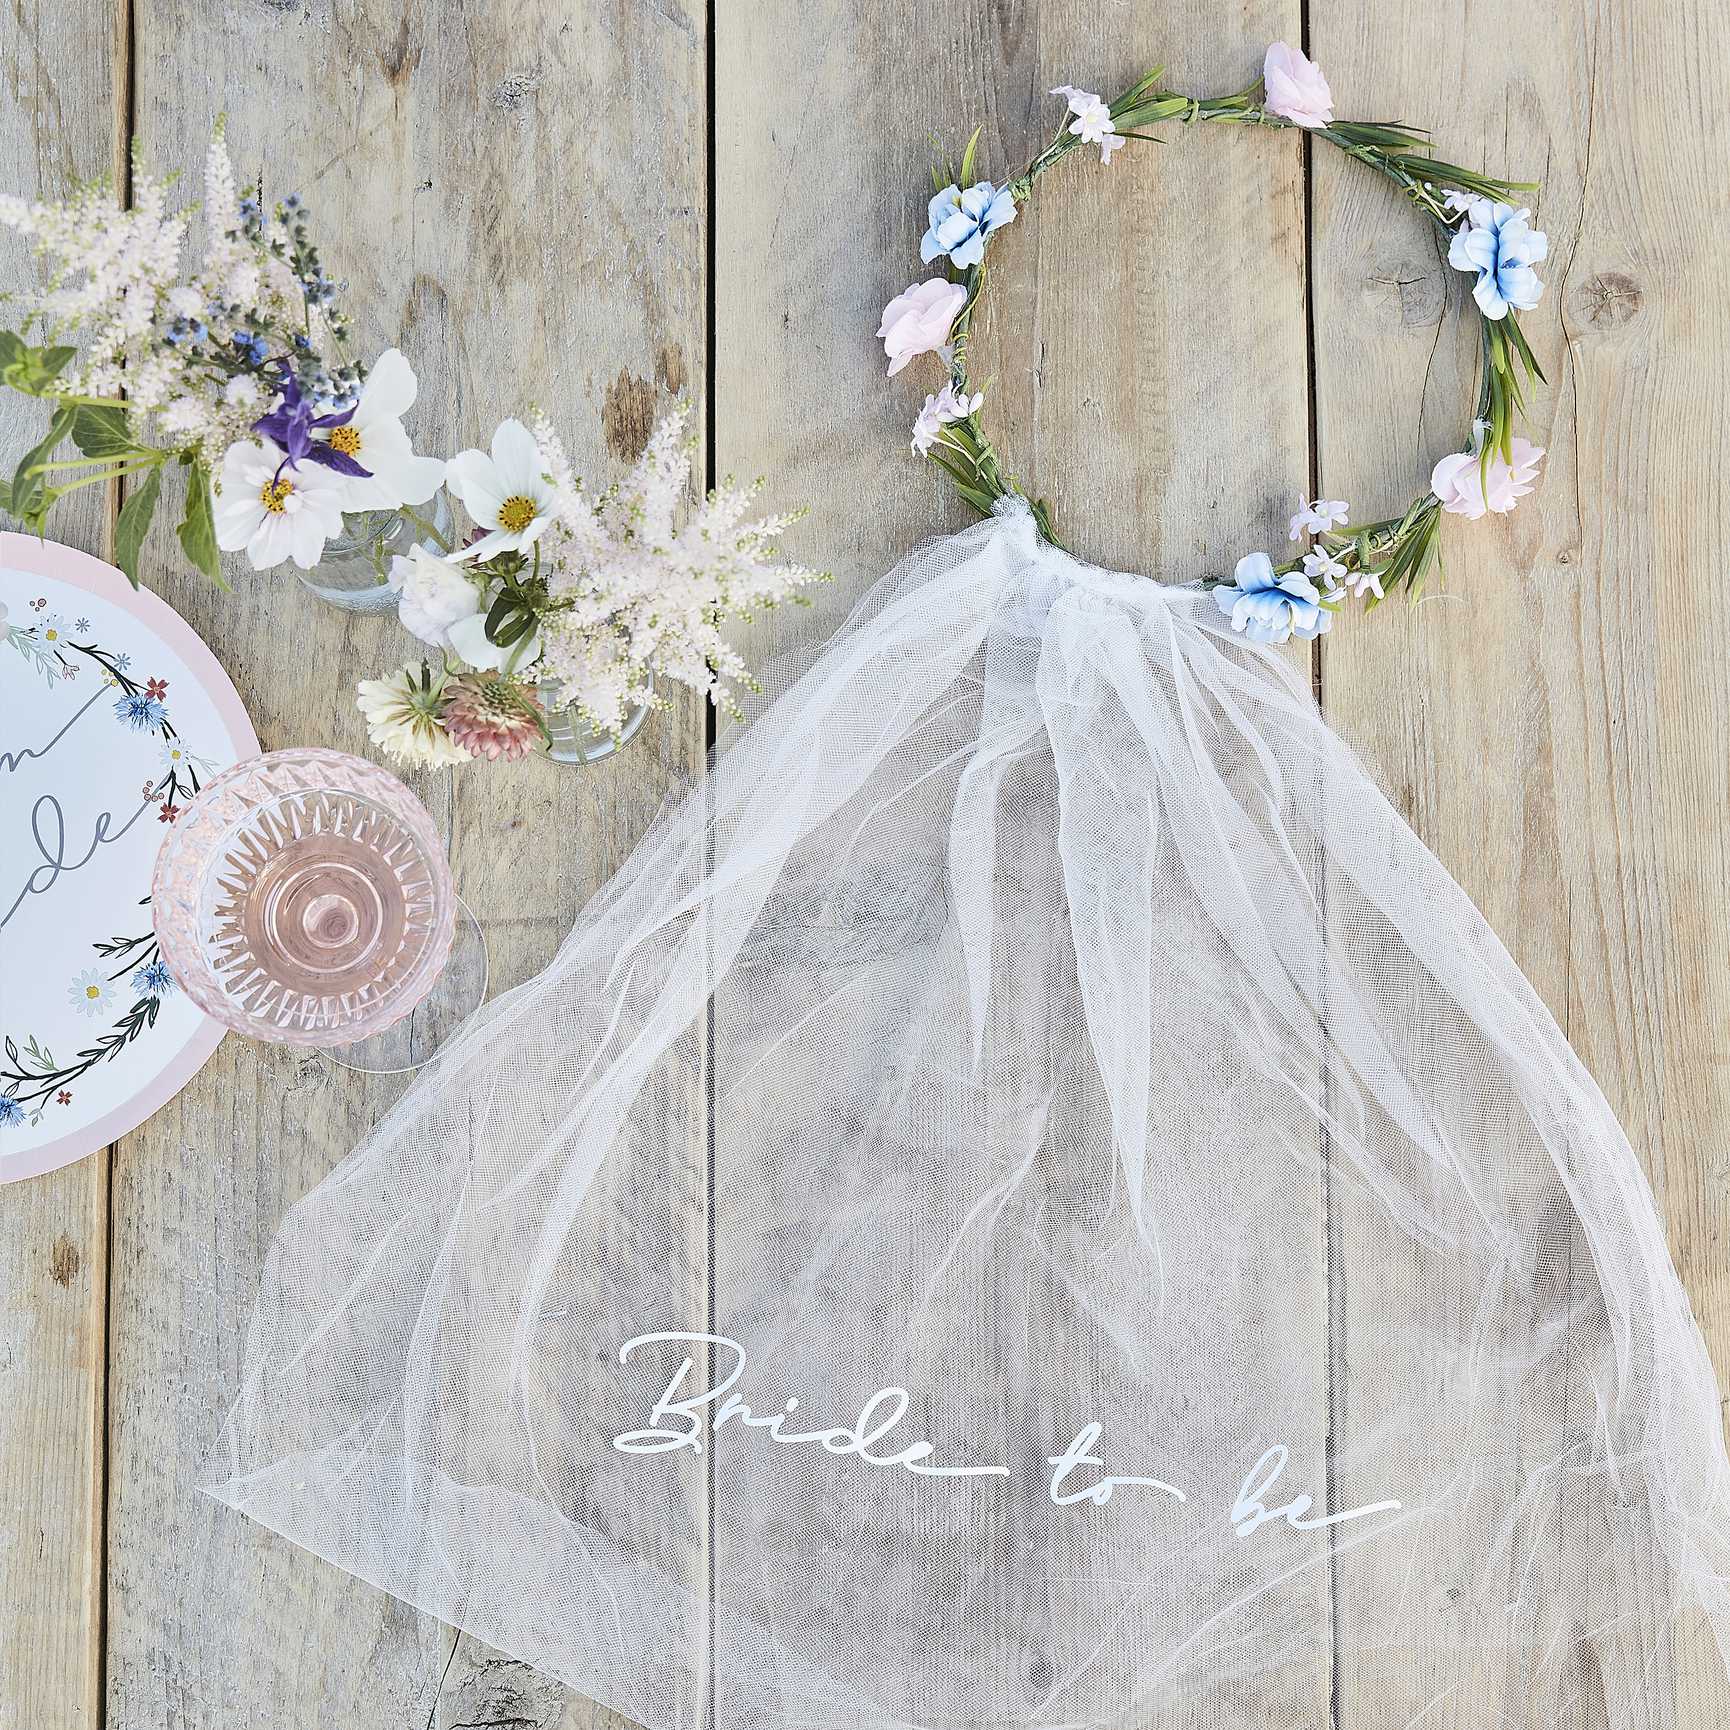 Ginger Ray Bride To Be Hen Party Veil with Floral Crown